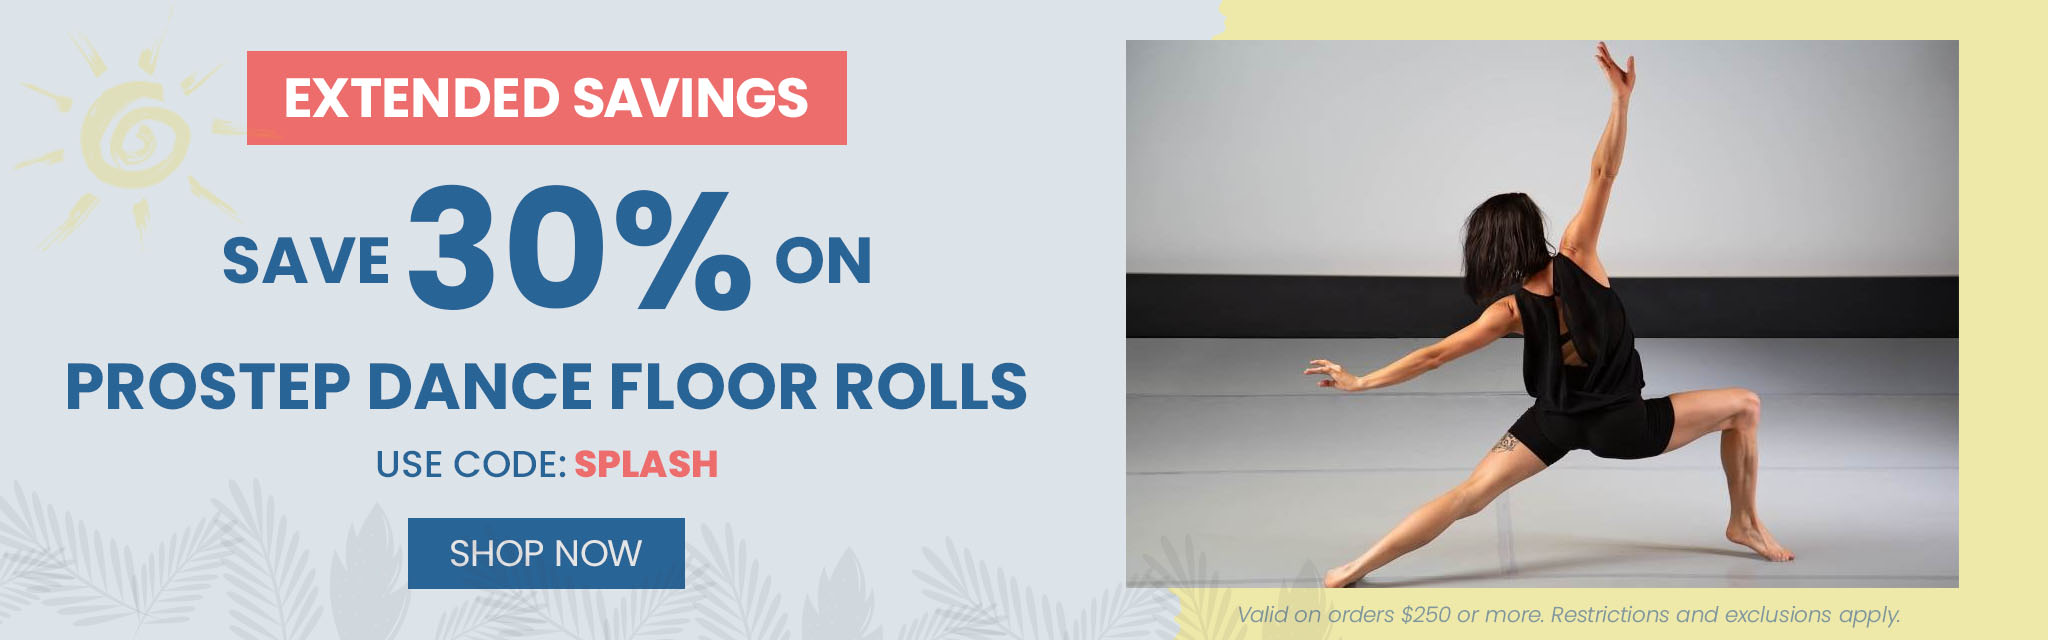 Extended Savings Save 30% On Prostep Dance Floor Rolls. Use Code: Splash Shop Now Valid on order $250 or more. Restrictions and exclusions apply.